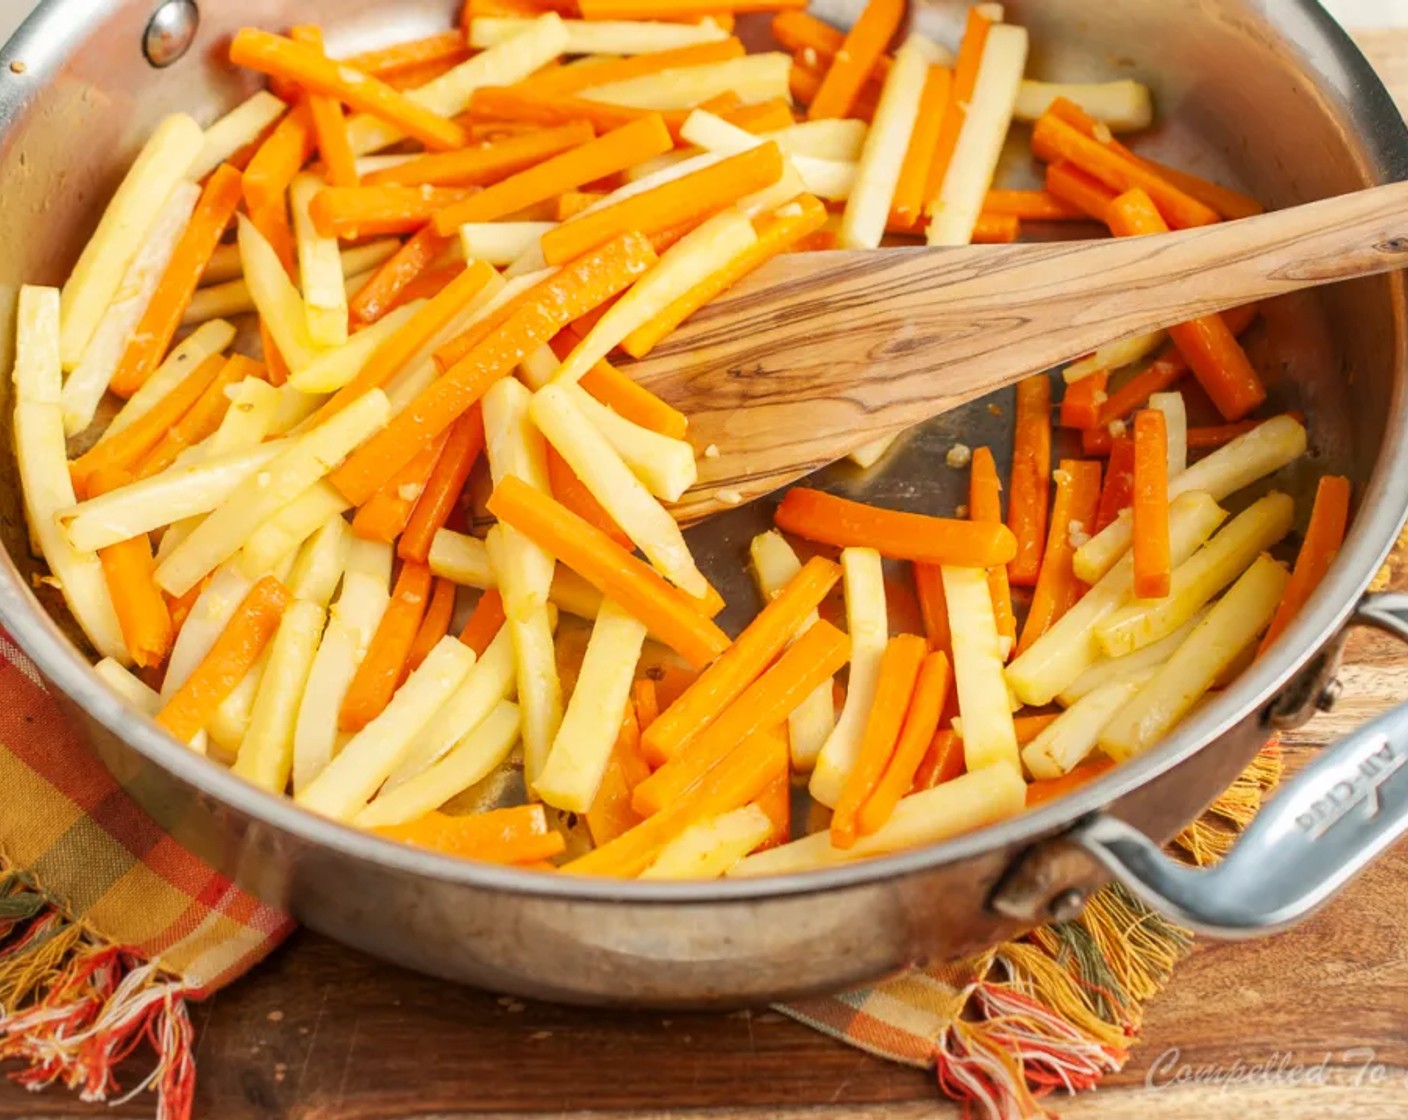 step 3 In a medium sautee pan, heat Unsalted Butter (2 Tbsp) until foamy, add Garlic (2 cloves) and sauté for 30-60 seconds, stirring once or twice. Add in carrots and parsnips, stir to coat with butter and garlic.